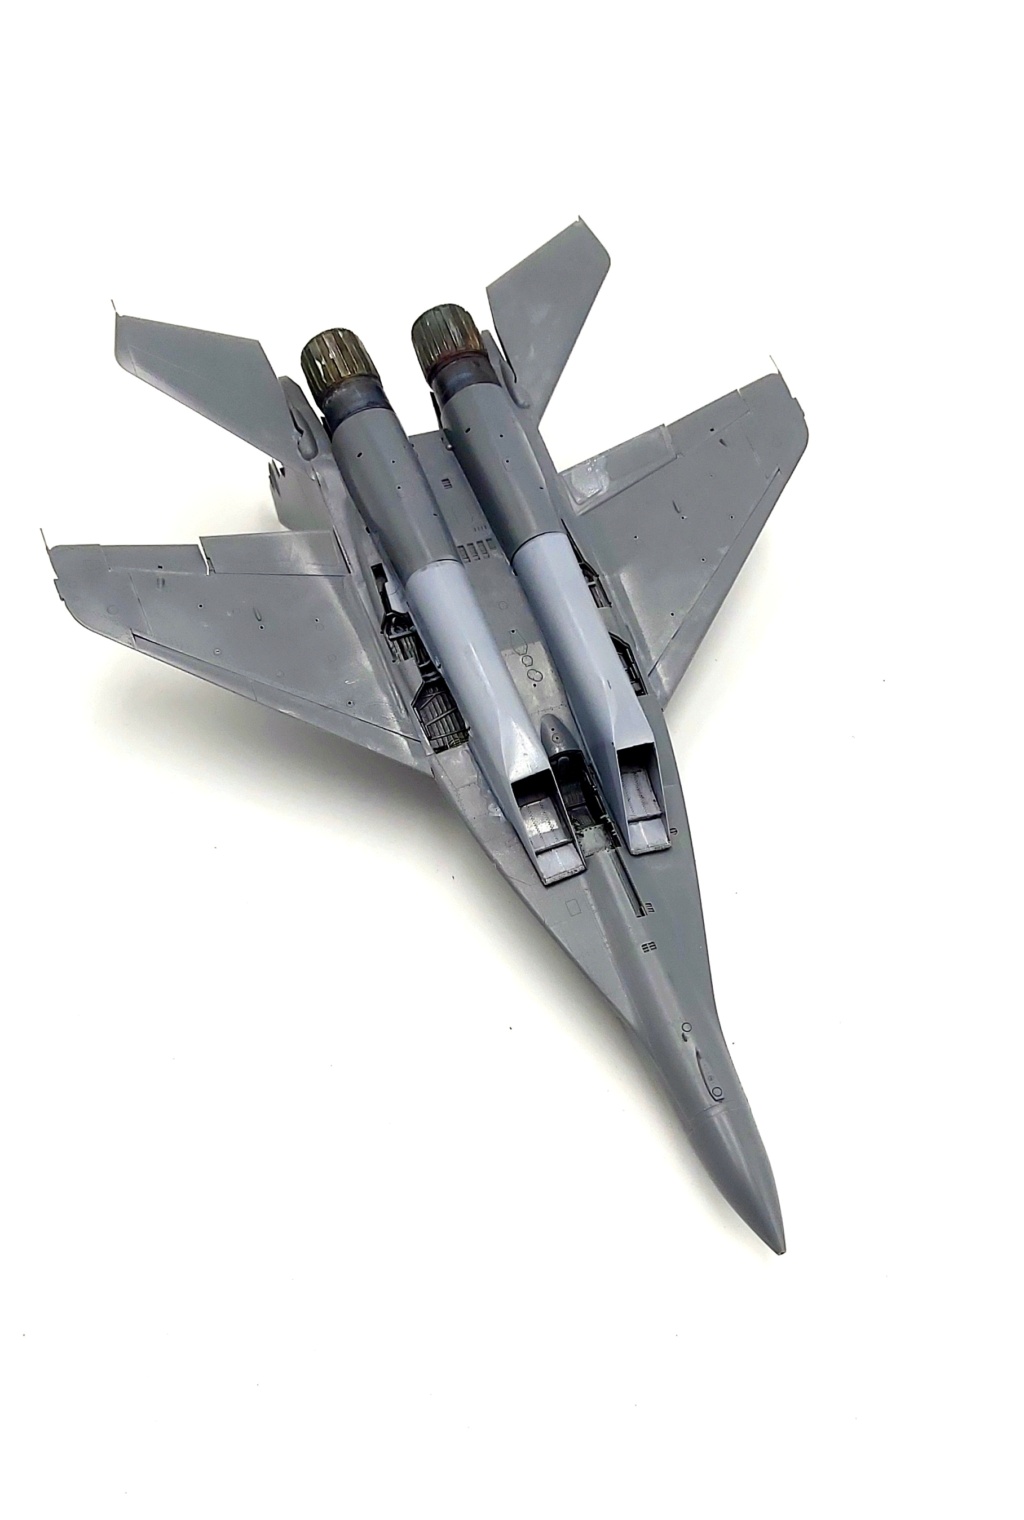 [Great Wall Hobby] 1/48 - Mikoyan-Gourevitch Mig-29 9-12 Fulcrum (A) JG3 LSK/LV DDR (RDA)  - Page 2 20230184